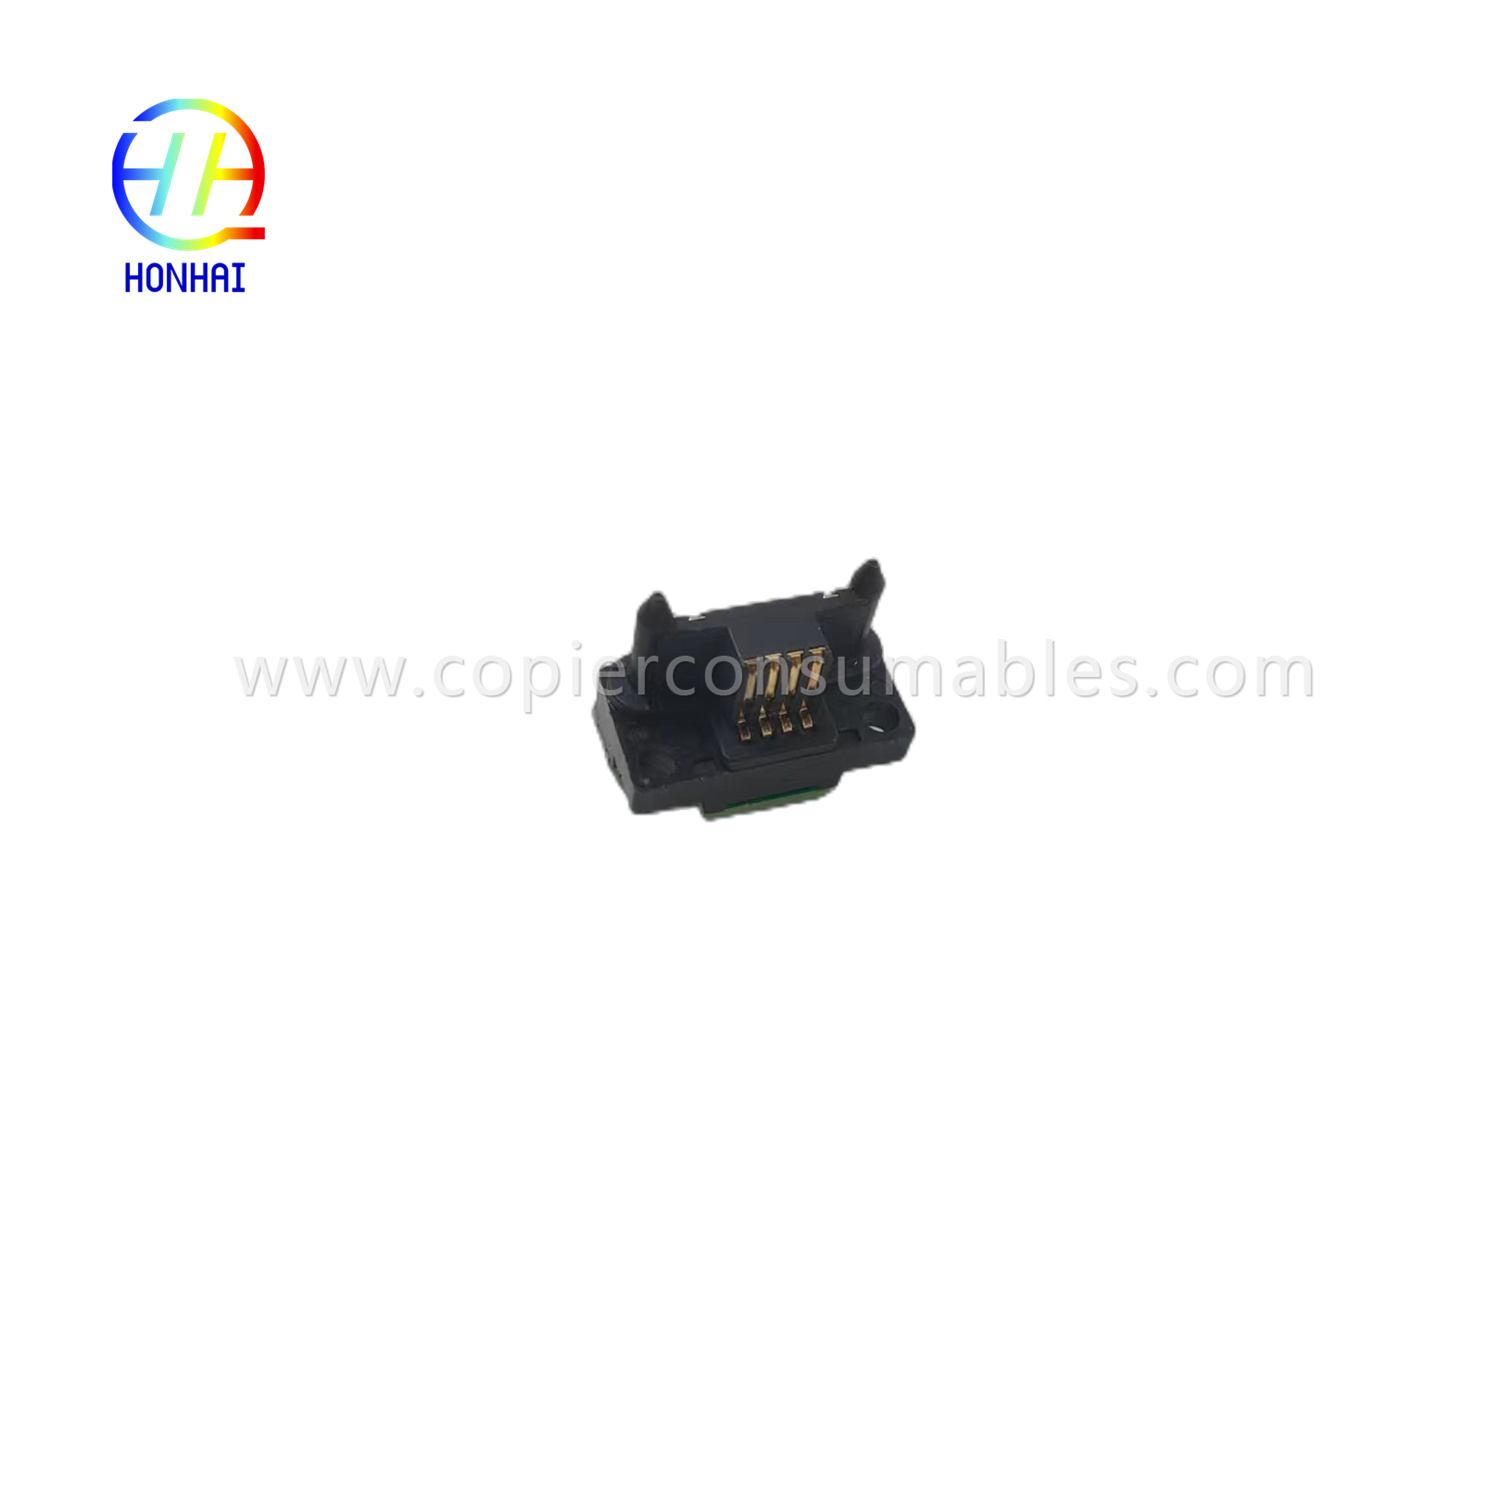 Drum Chip for Xerox 113R00673 113R673 Workcentre 5755 5875 5865 5845 5855 5875 5890 Chip